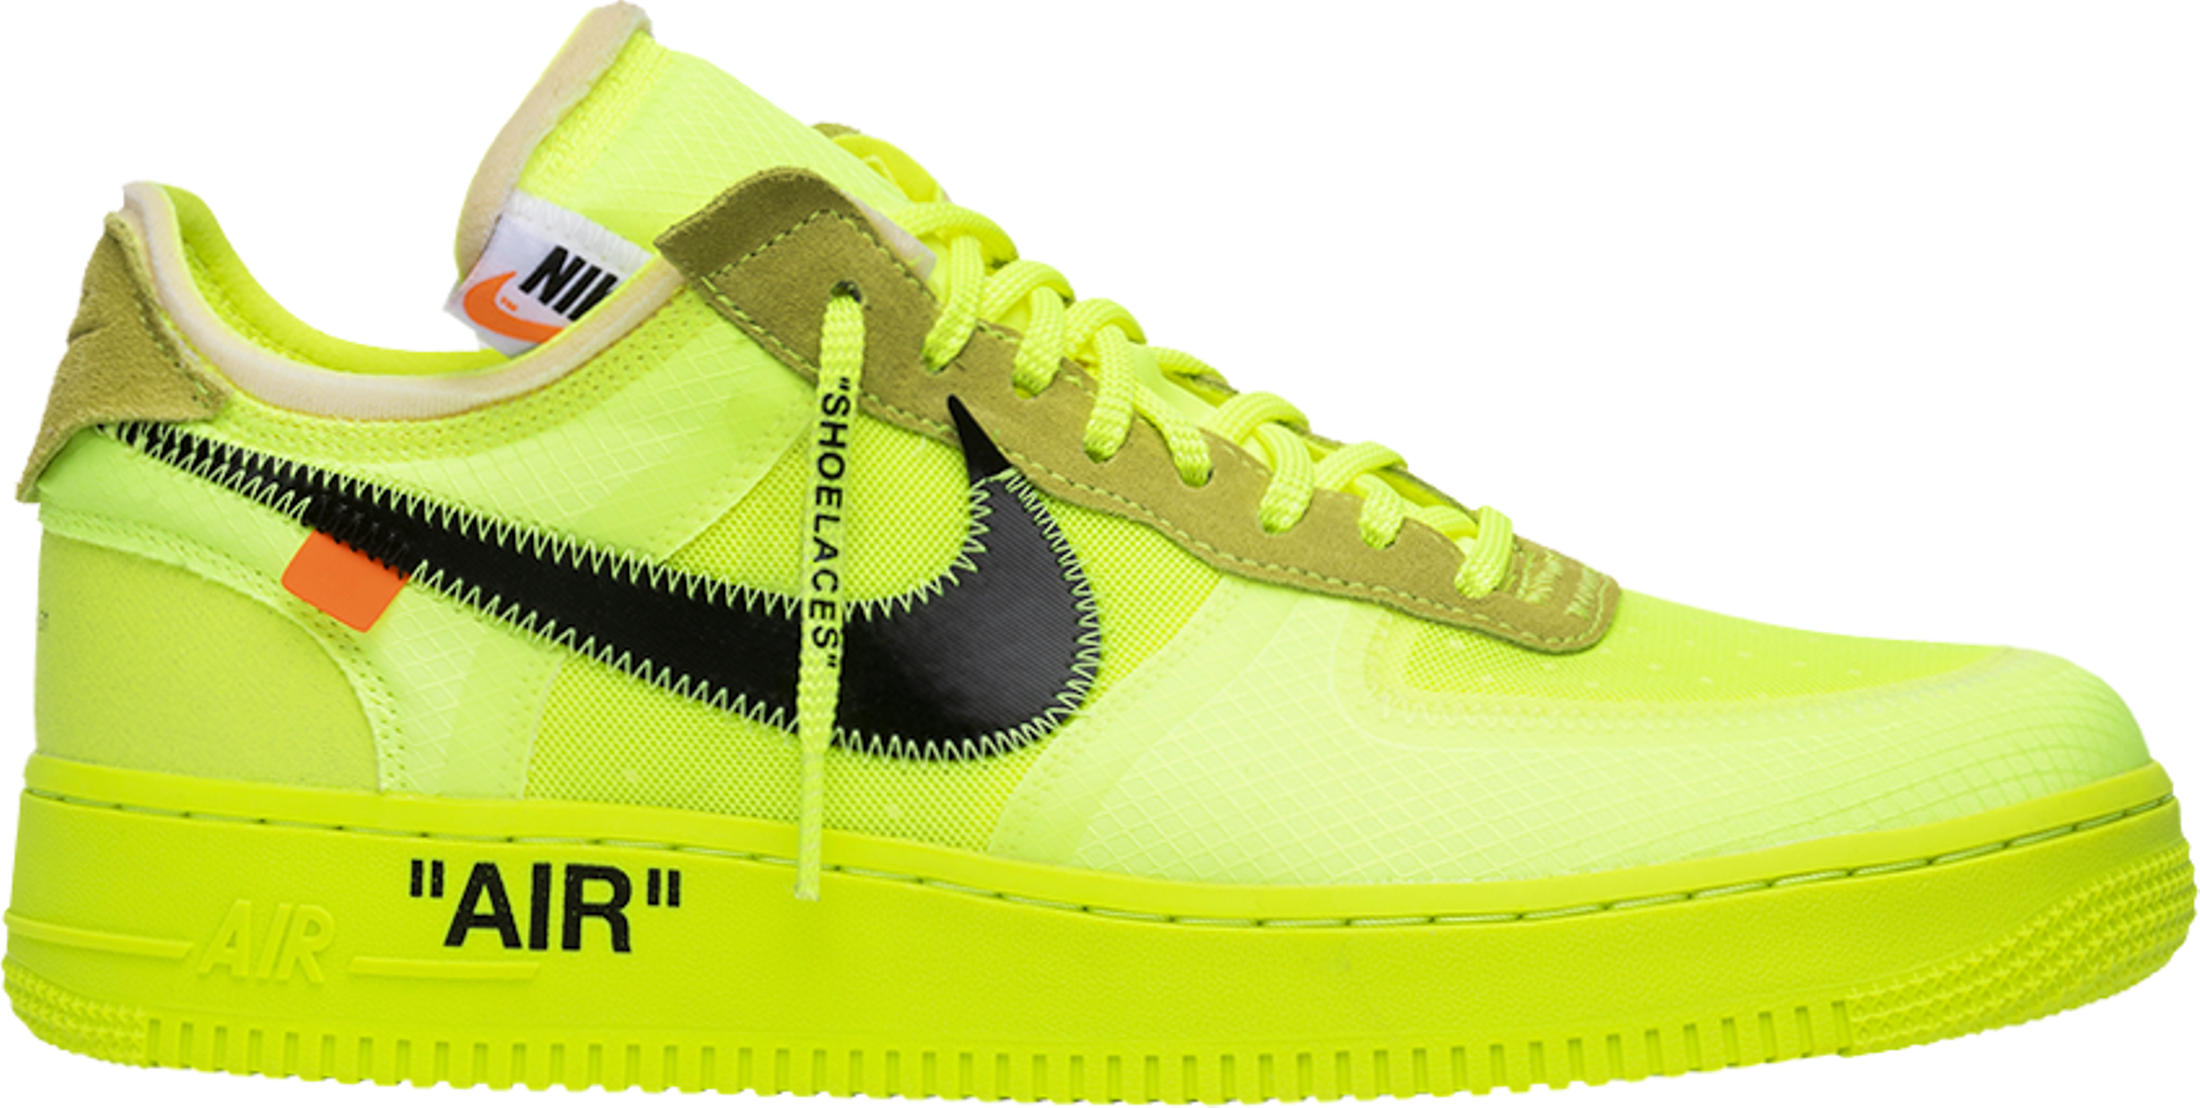 Off-White Air Force 1 Low Volt - AO4606-700